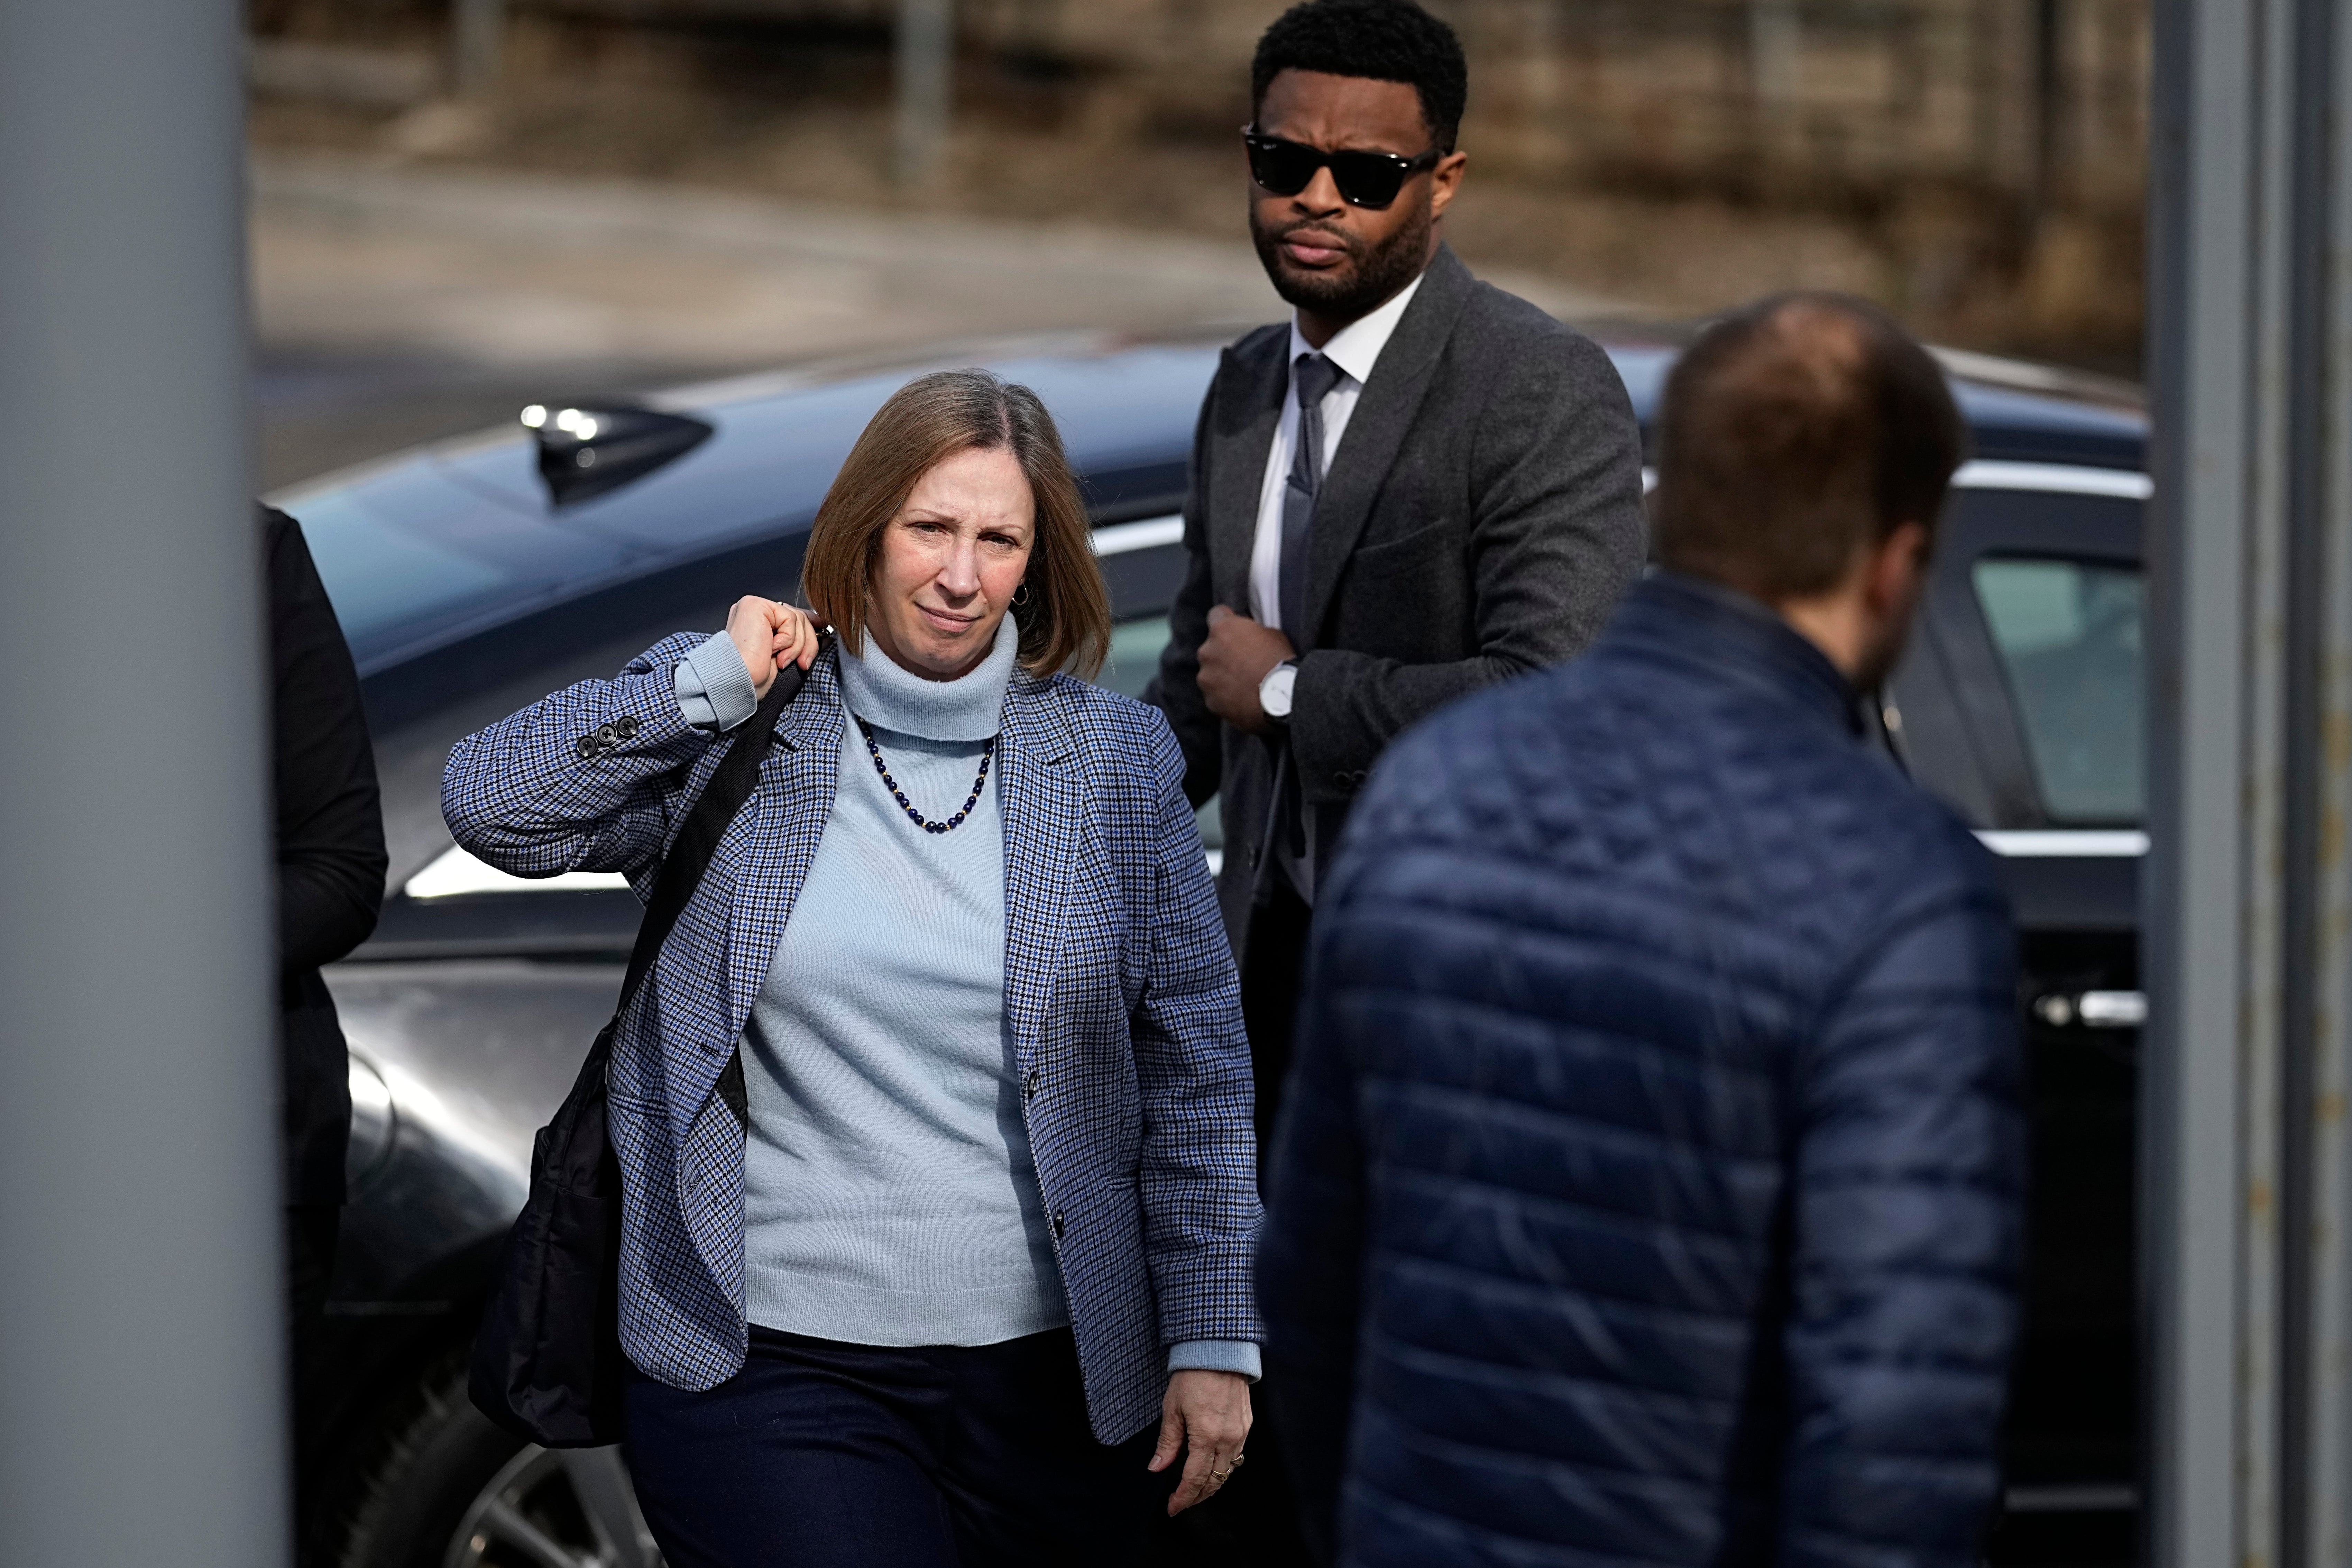 US Ambassador to Russia Lynne Tracy, left, enters the Moscow City Court to attend hearing on Wall Street Journal reporter Evan Gershkovich's case, in Moscow, Russia